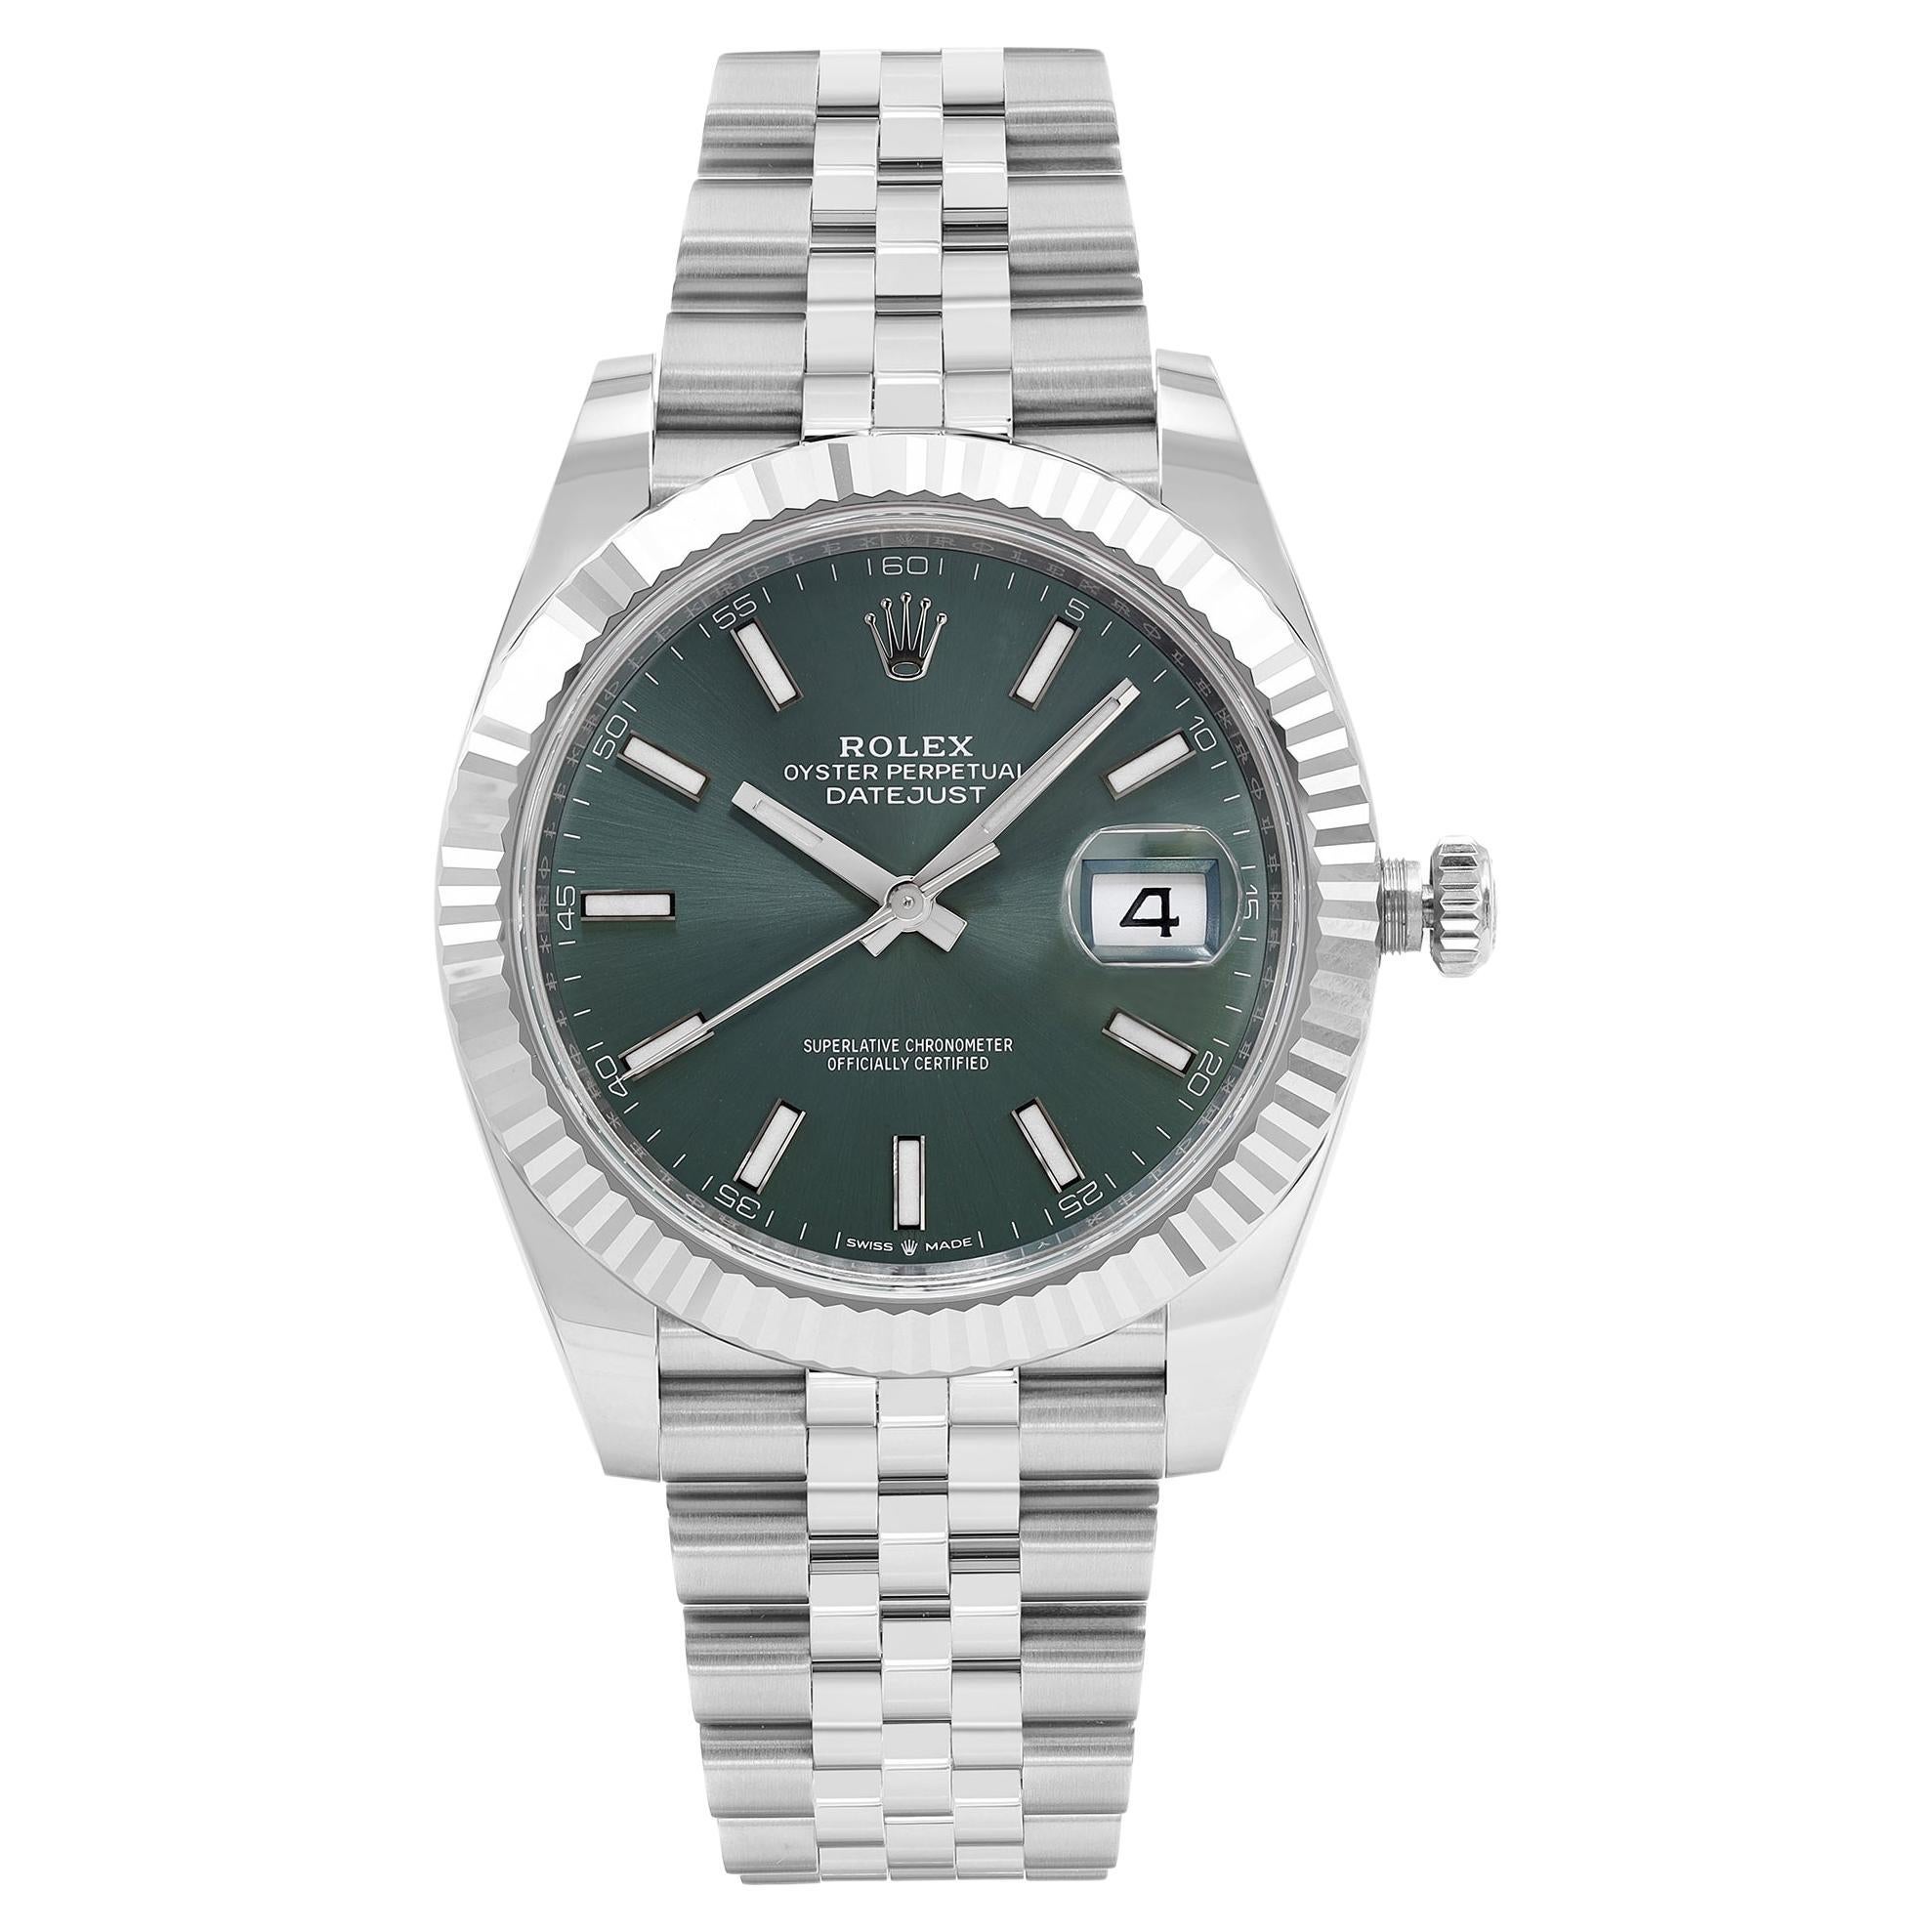 Rolex Datejust 41 Mint Green New Release Steel White Gold Automatic Watch 126334